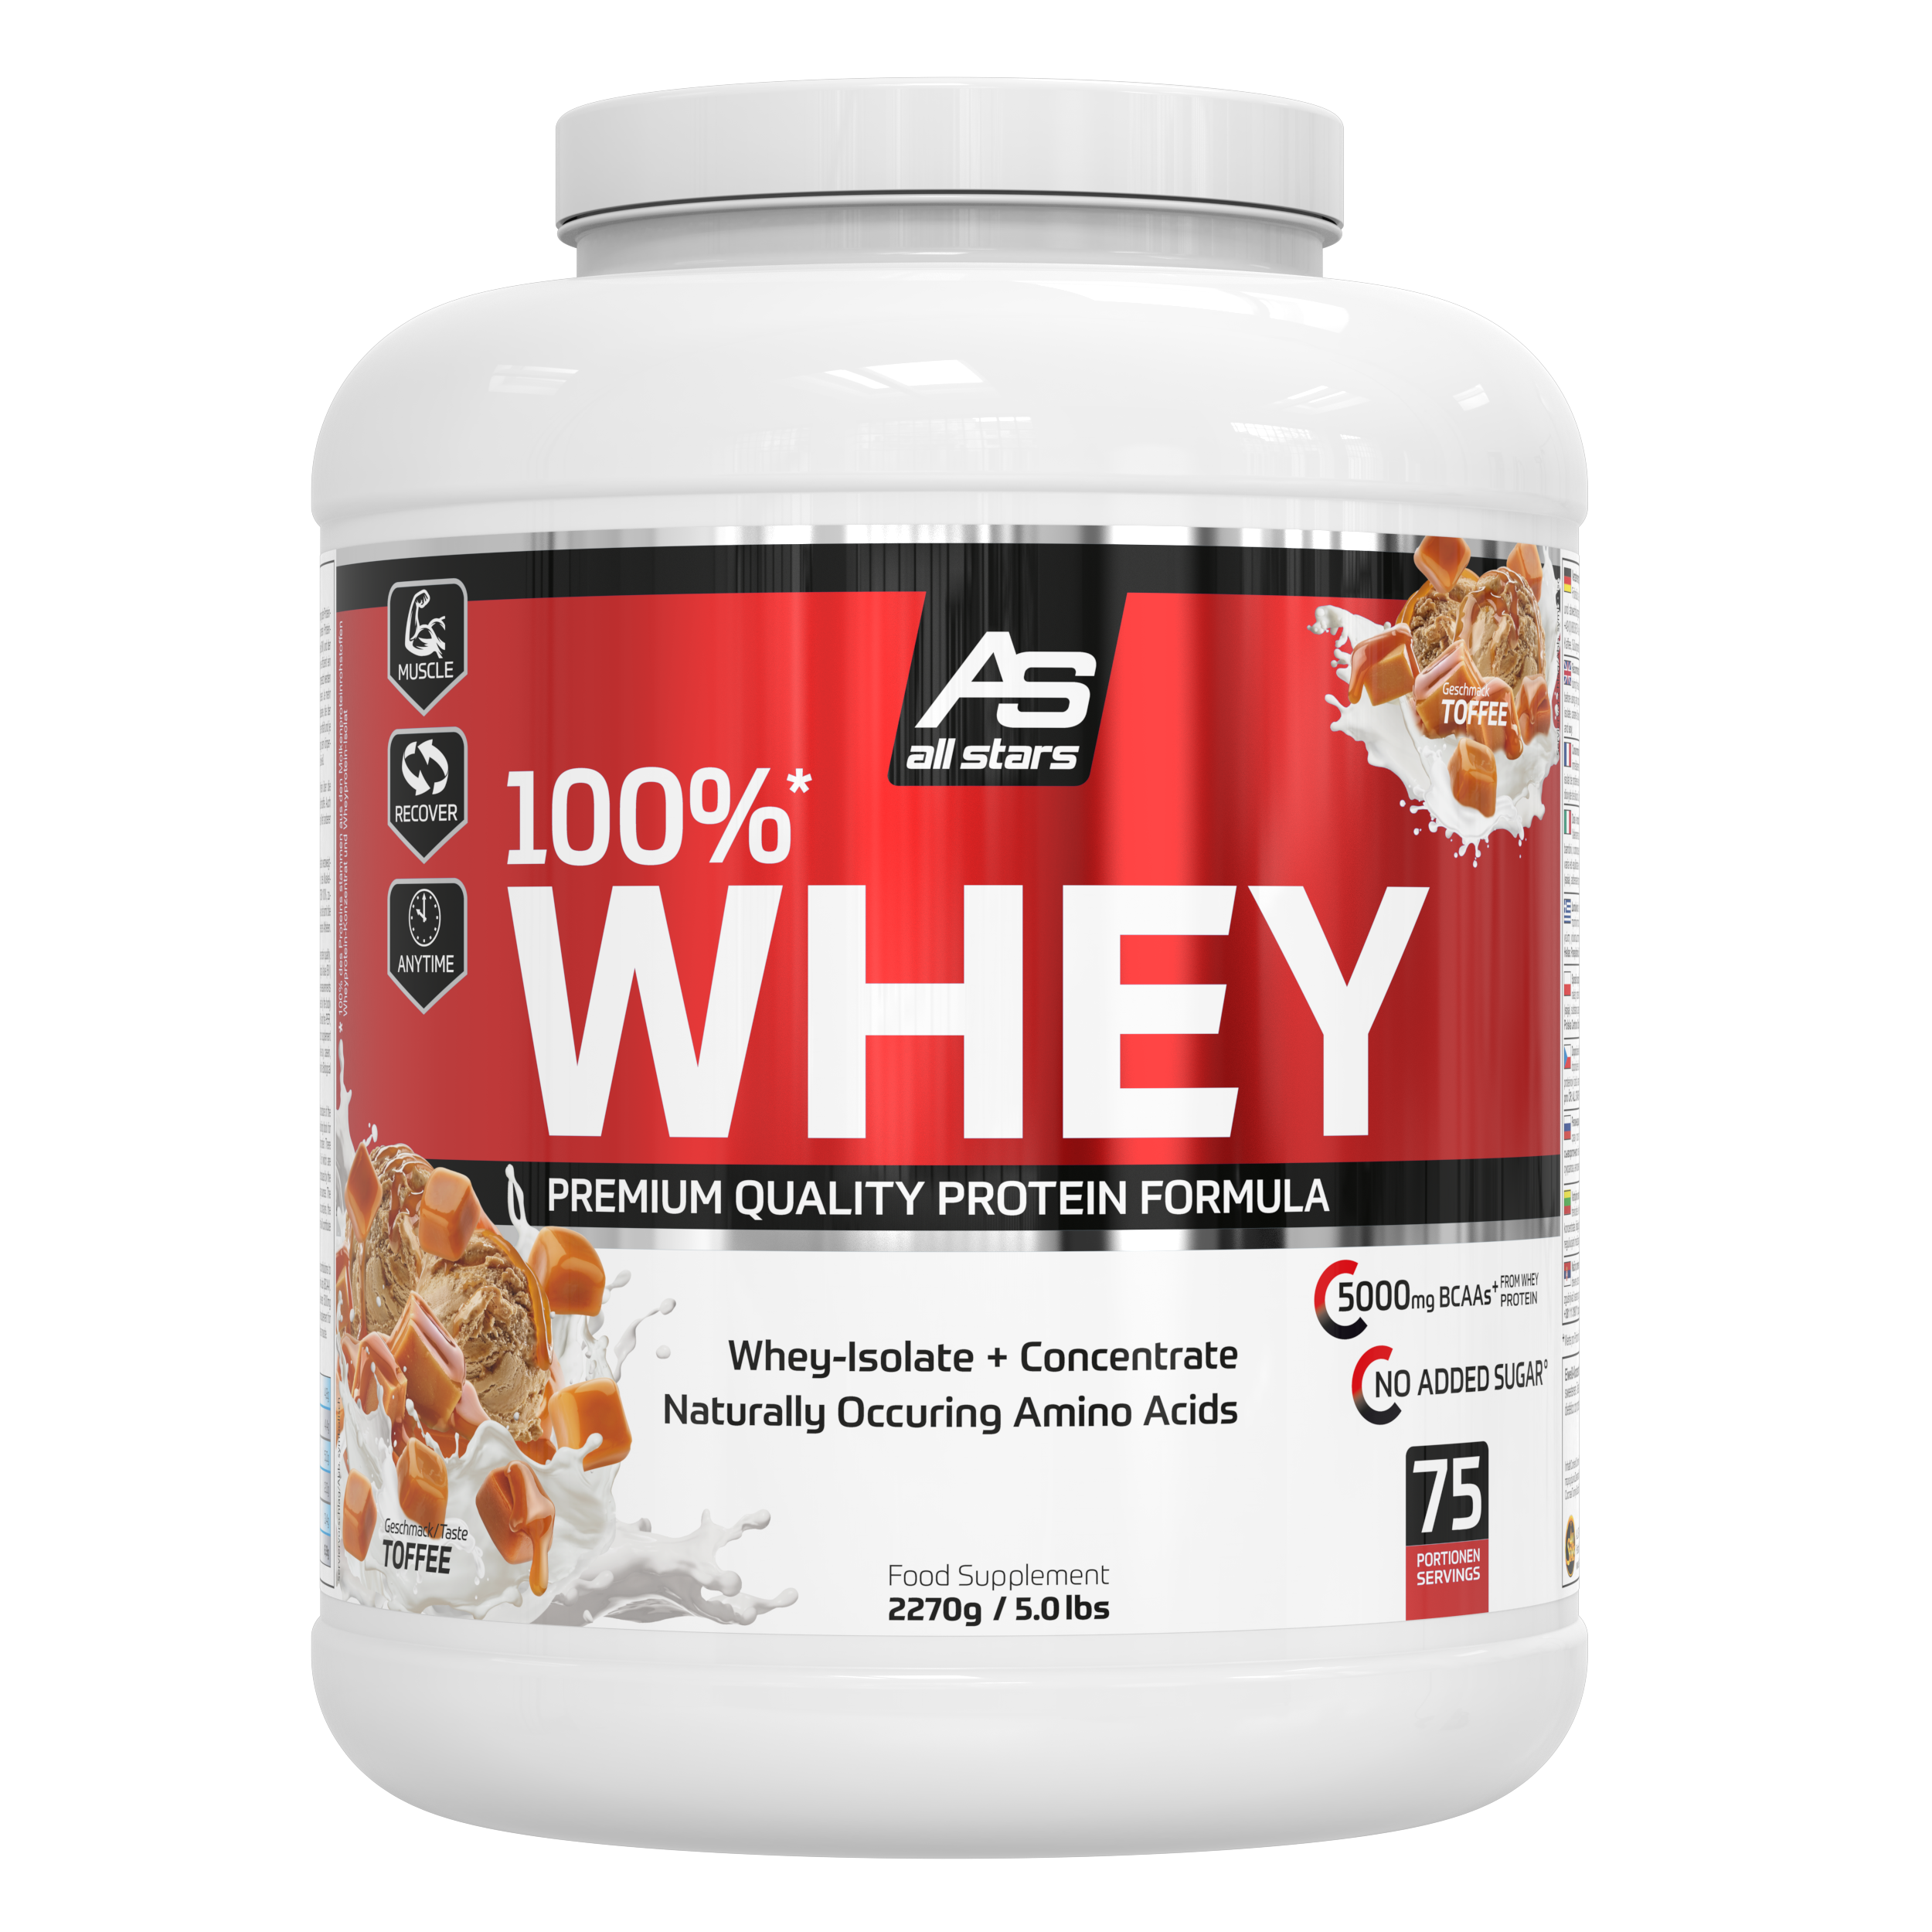 ALL STARS 100% Whey Protein - 2270g Dose